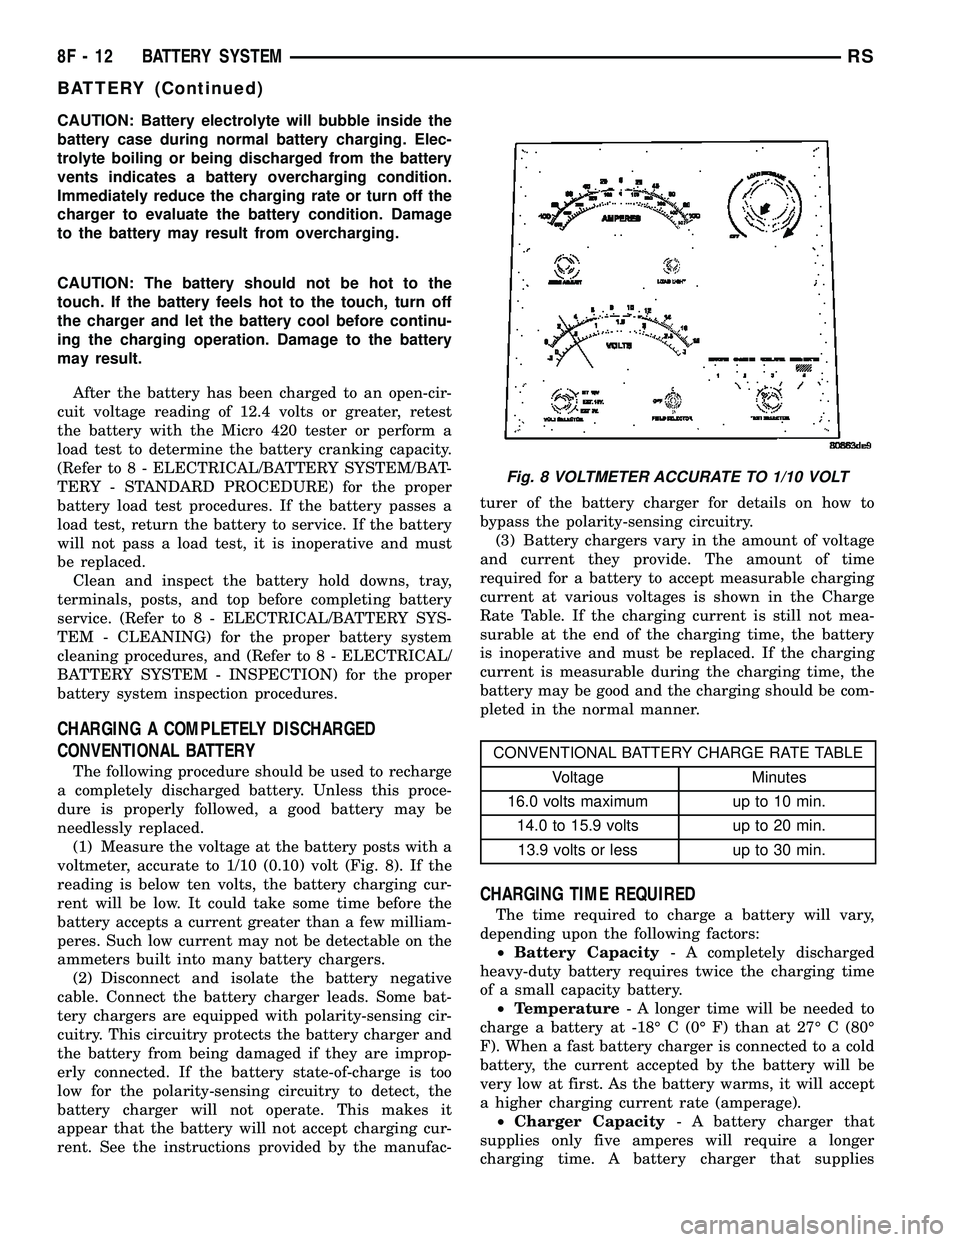 CHRYSLER VOYAGER 2005  Service Manual CAUTION: Battery electrolyte will bubble inside the
battery case during normal battery charging. Elec-
trolyte boiling or being discharged from the battery
vents indicates a battery overcharging condi